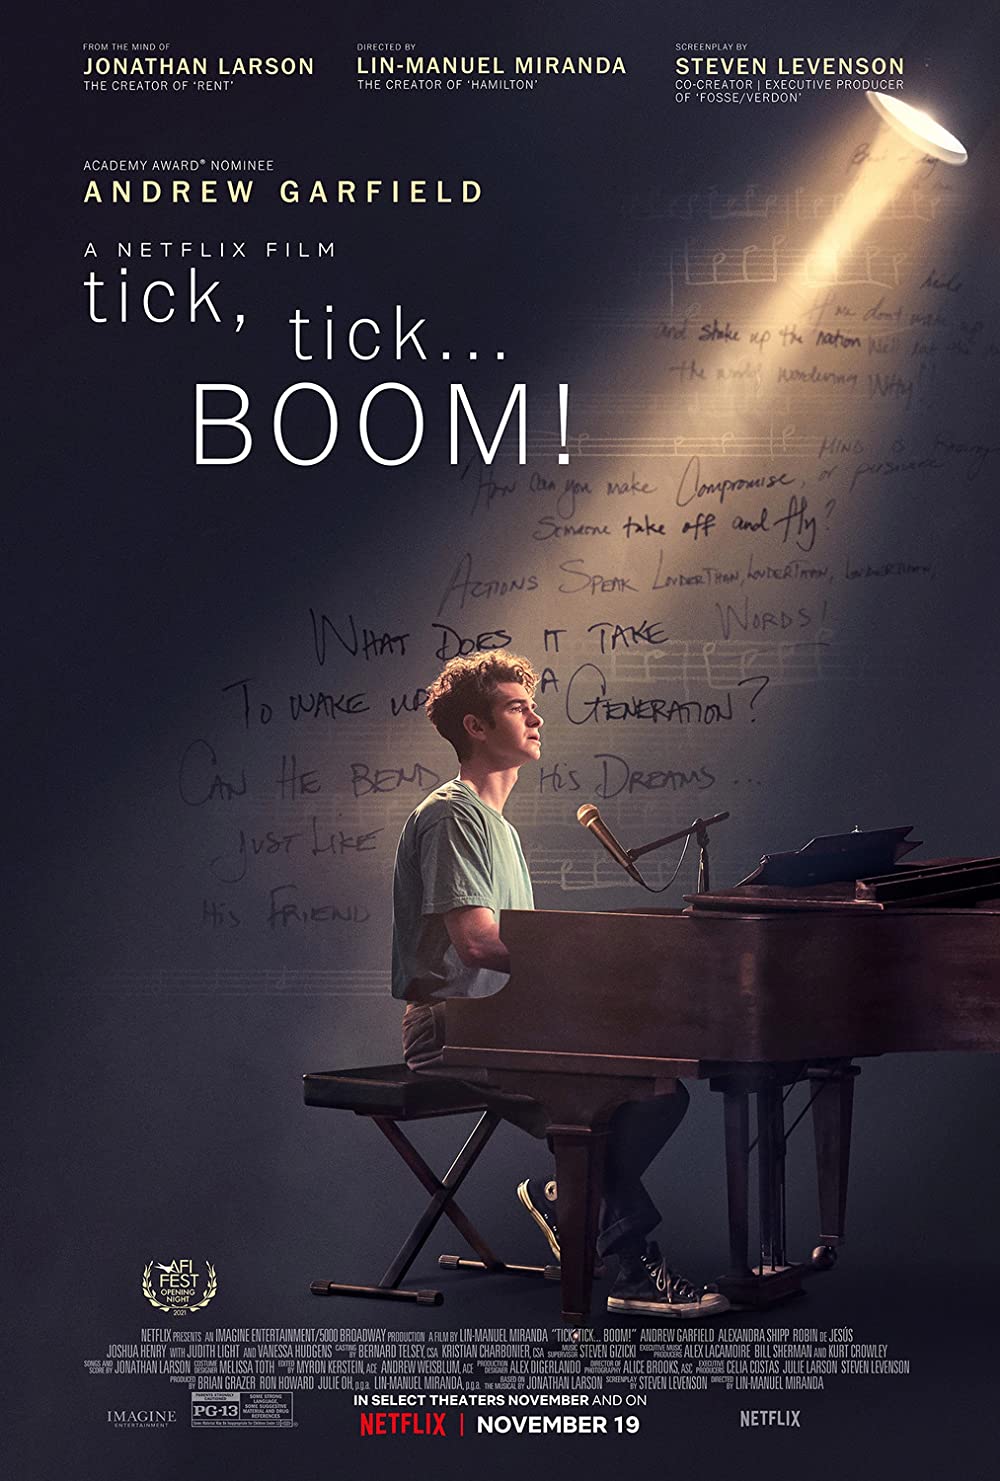 movie poster for tick, tick BOOM!